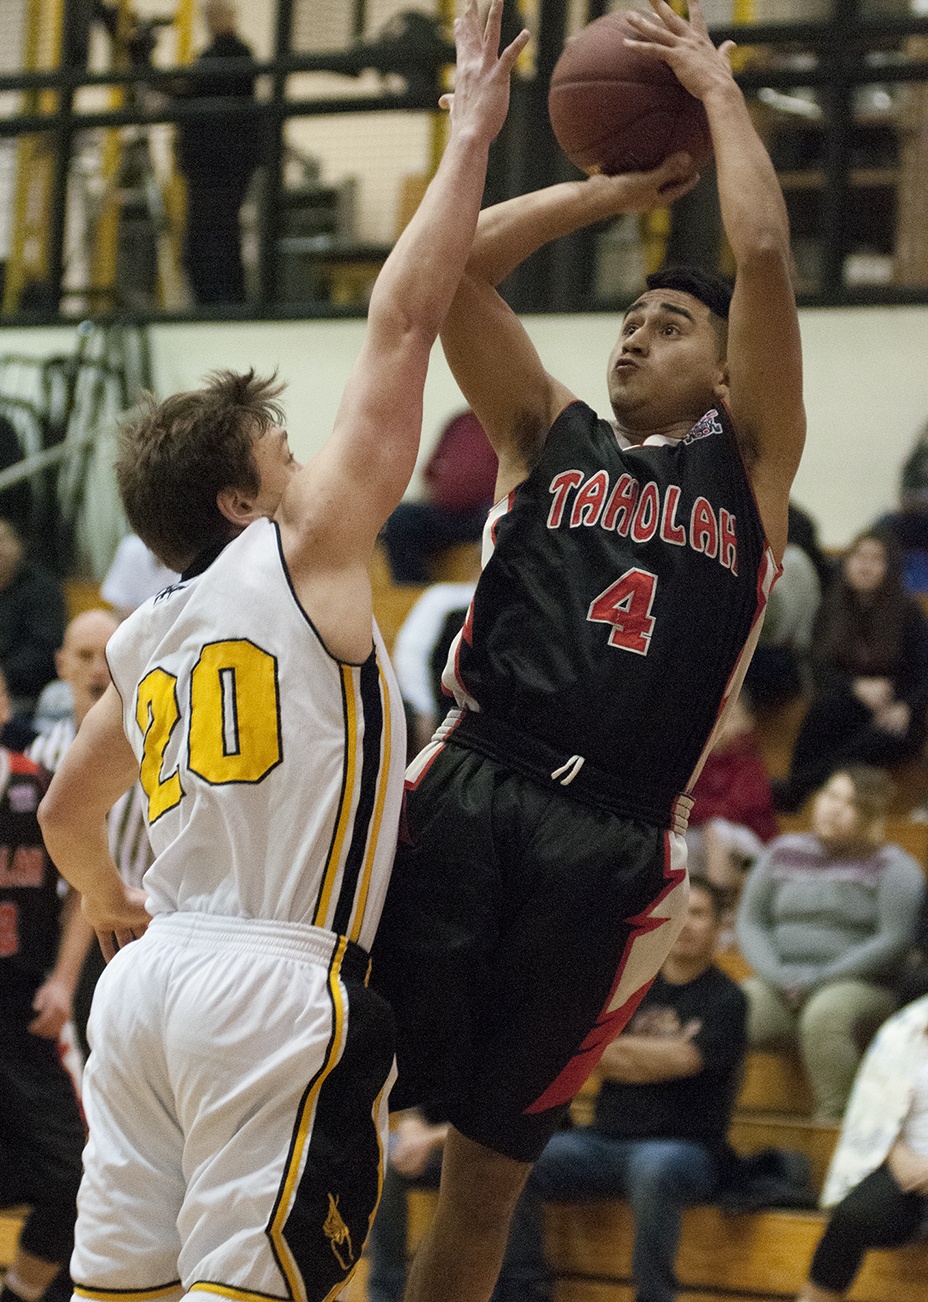 Taholah hits its offensive stride in win over rival North Beach